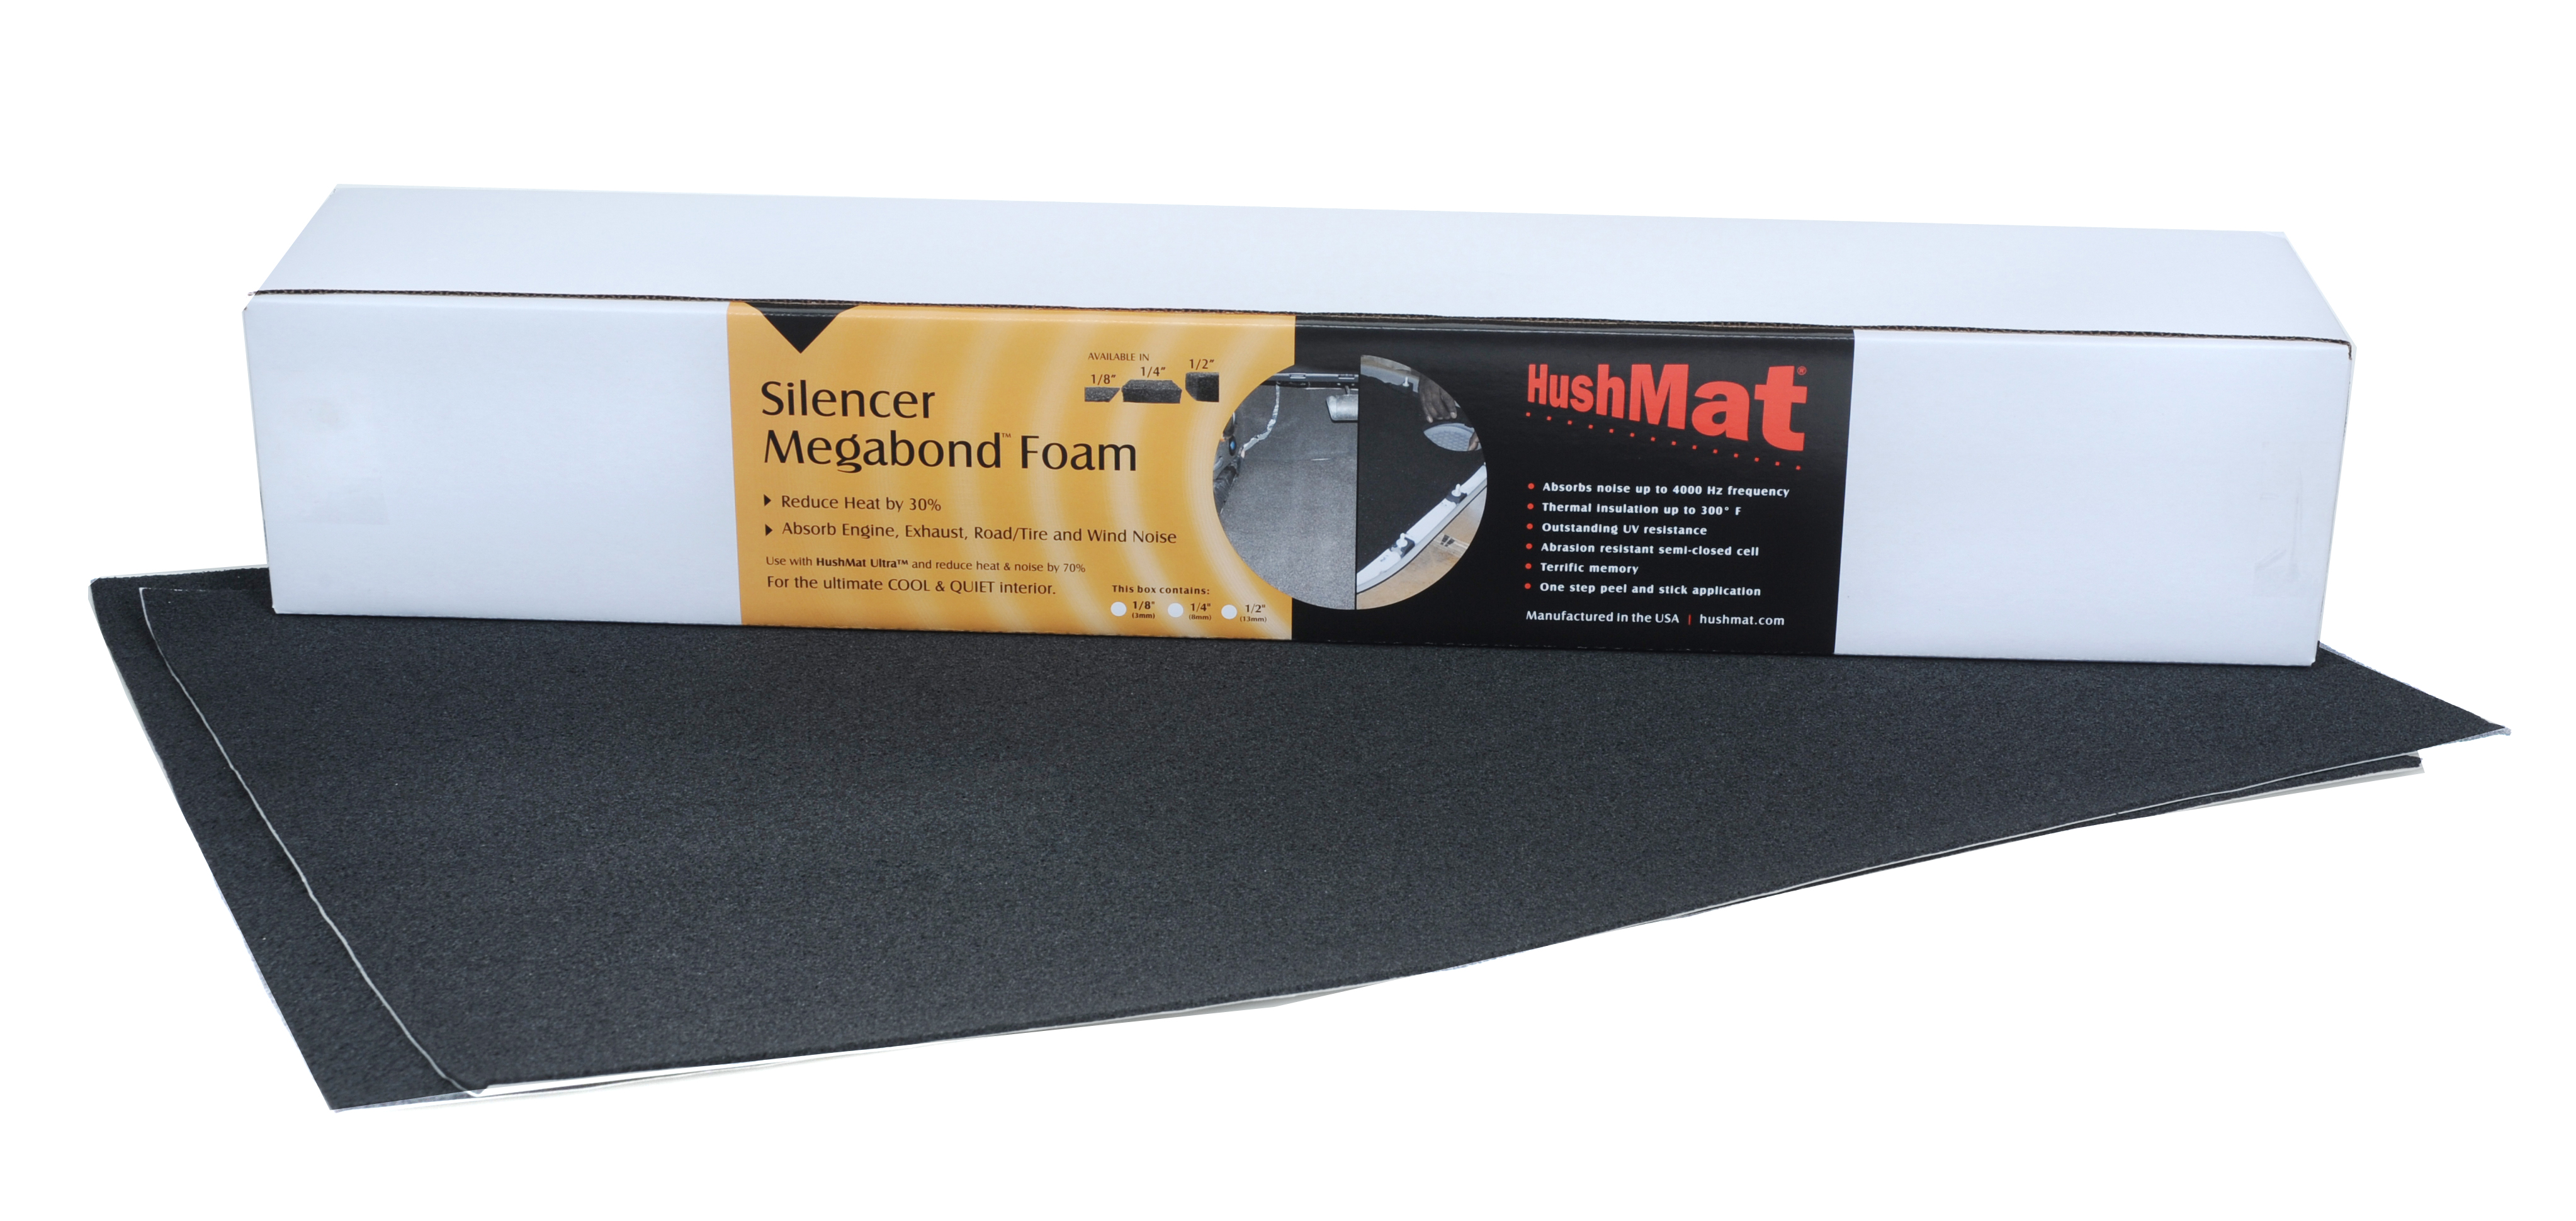 Hushmat 20100 Thermal Acoustic Insulation